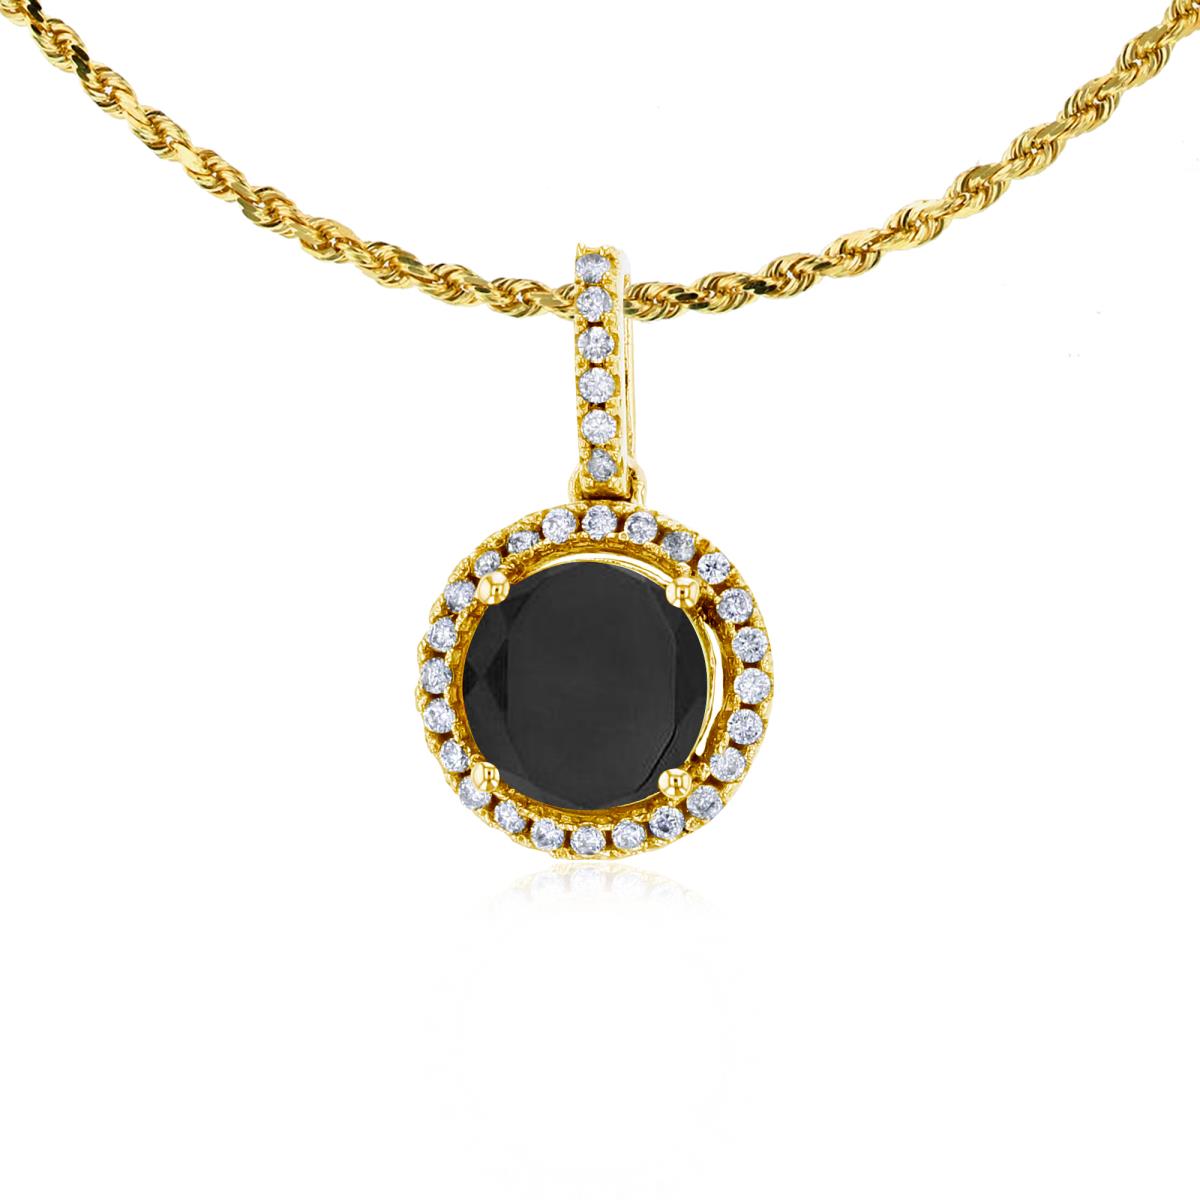 10K Yellow Gold 7mm Round Onyx & 0.15 CTTW Round Diamonds Halo 18" Rope Chain Necklace